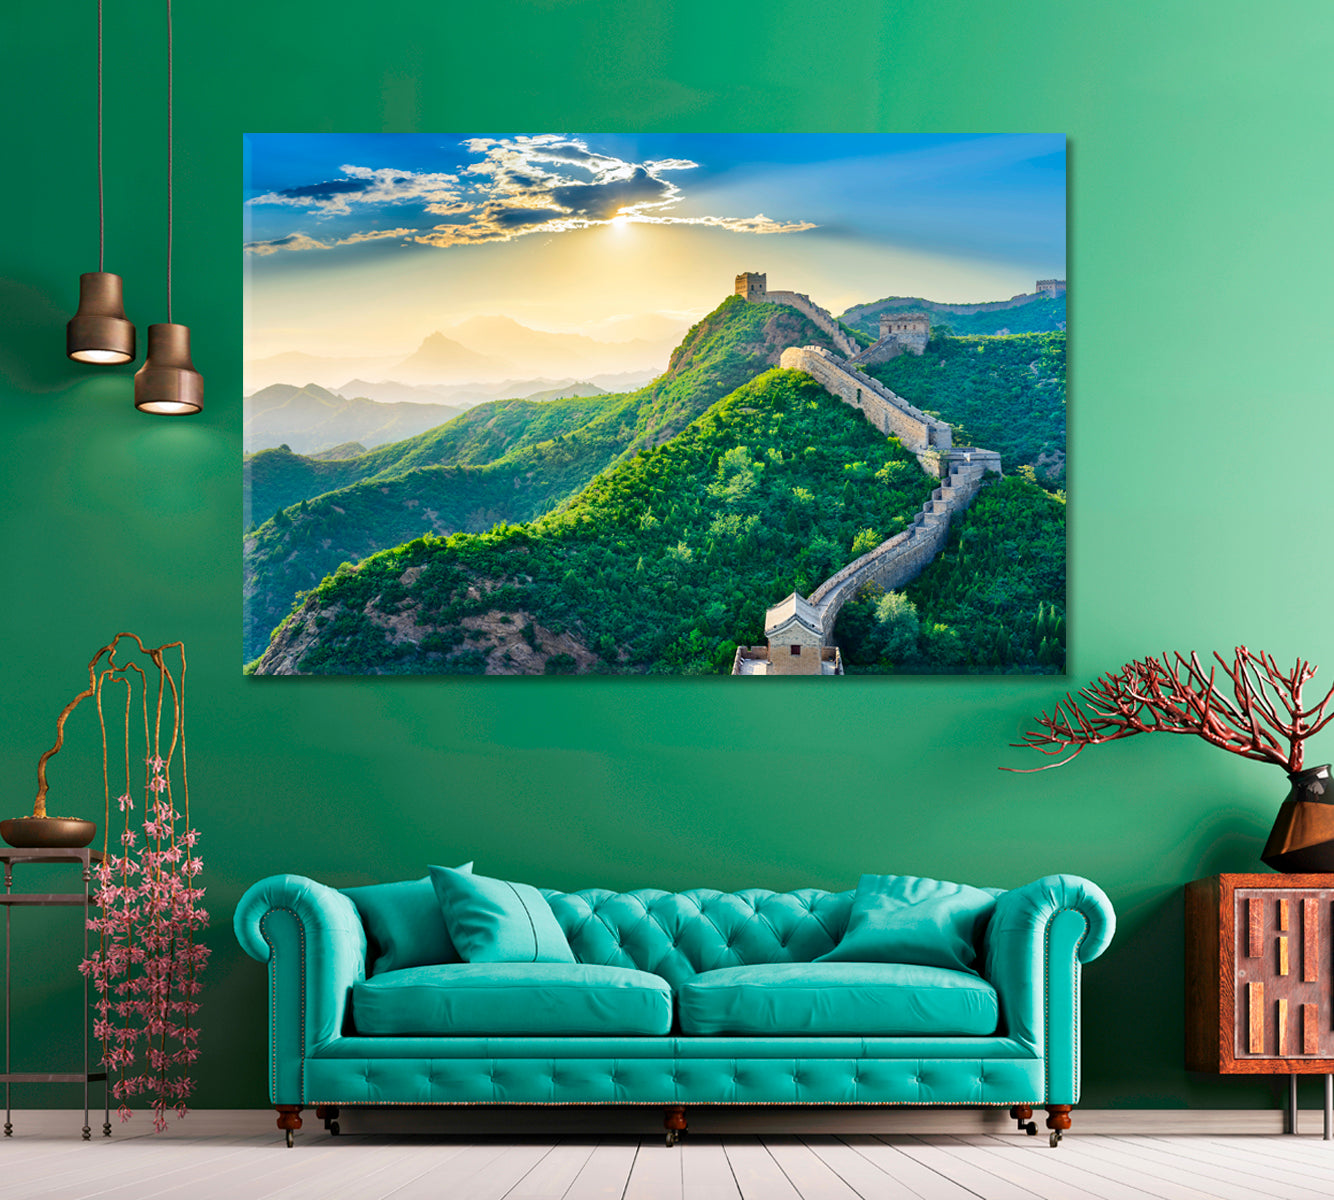 Great Wall of China at Sunset Canvas Print ArtLexy 1 Panel 24"x16" inches 